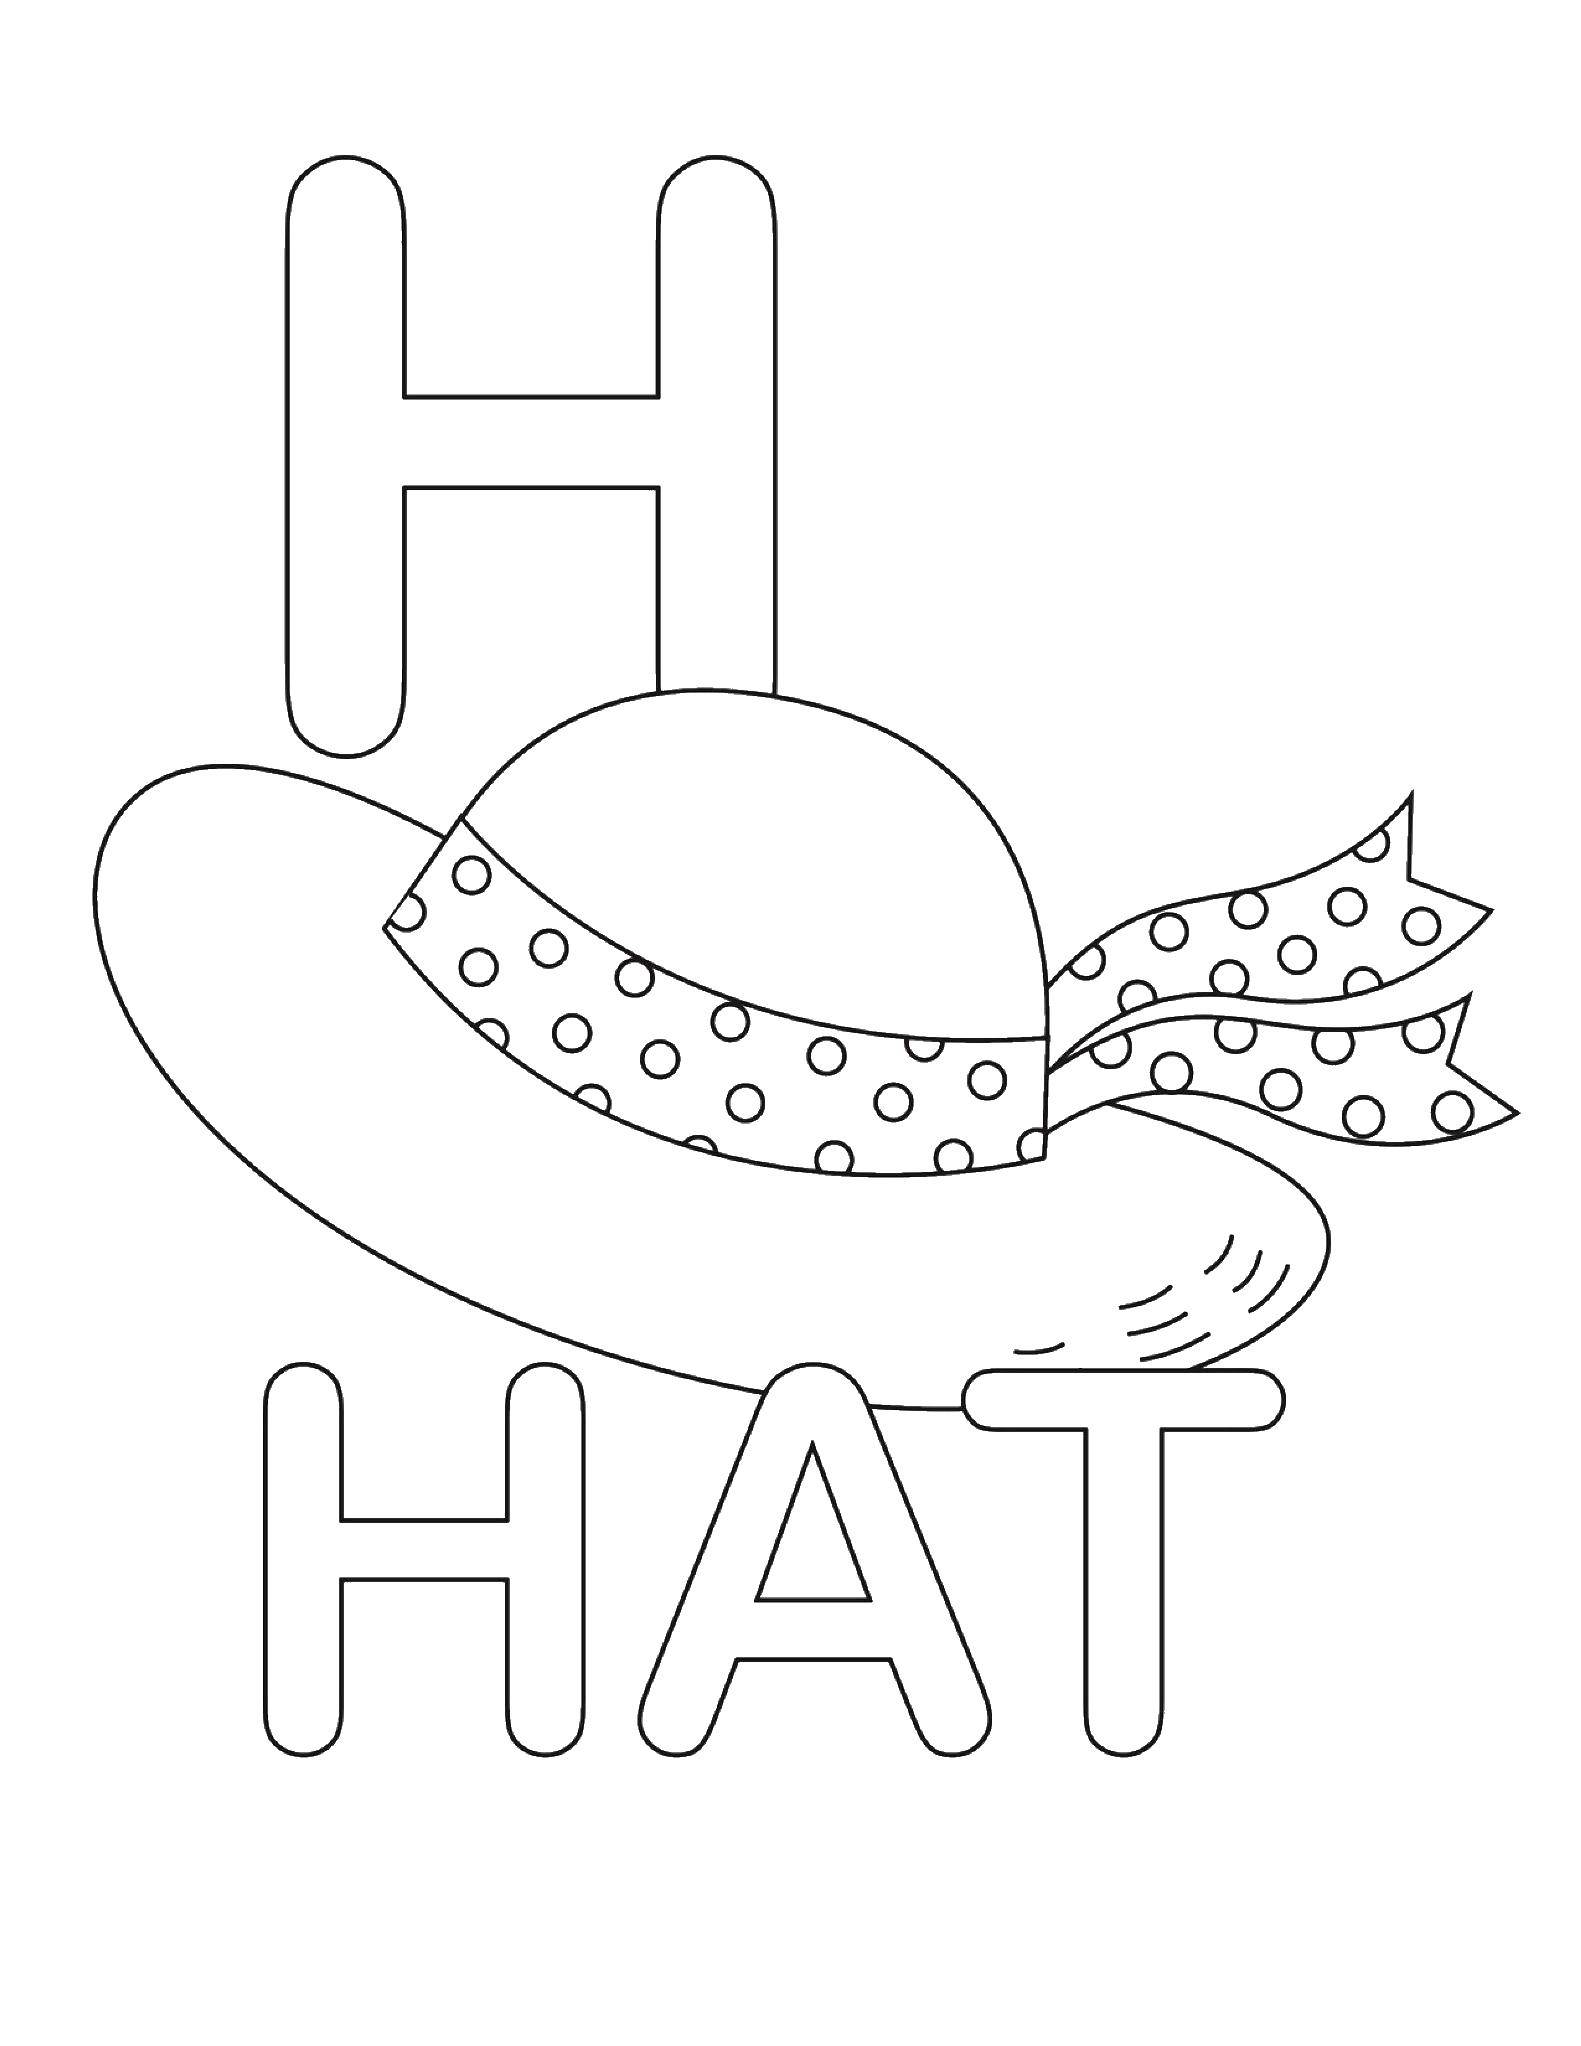 Coloring W hat. Category English words. Tags:  English.